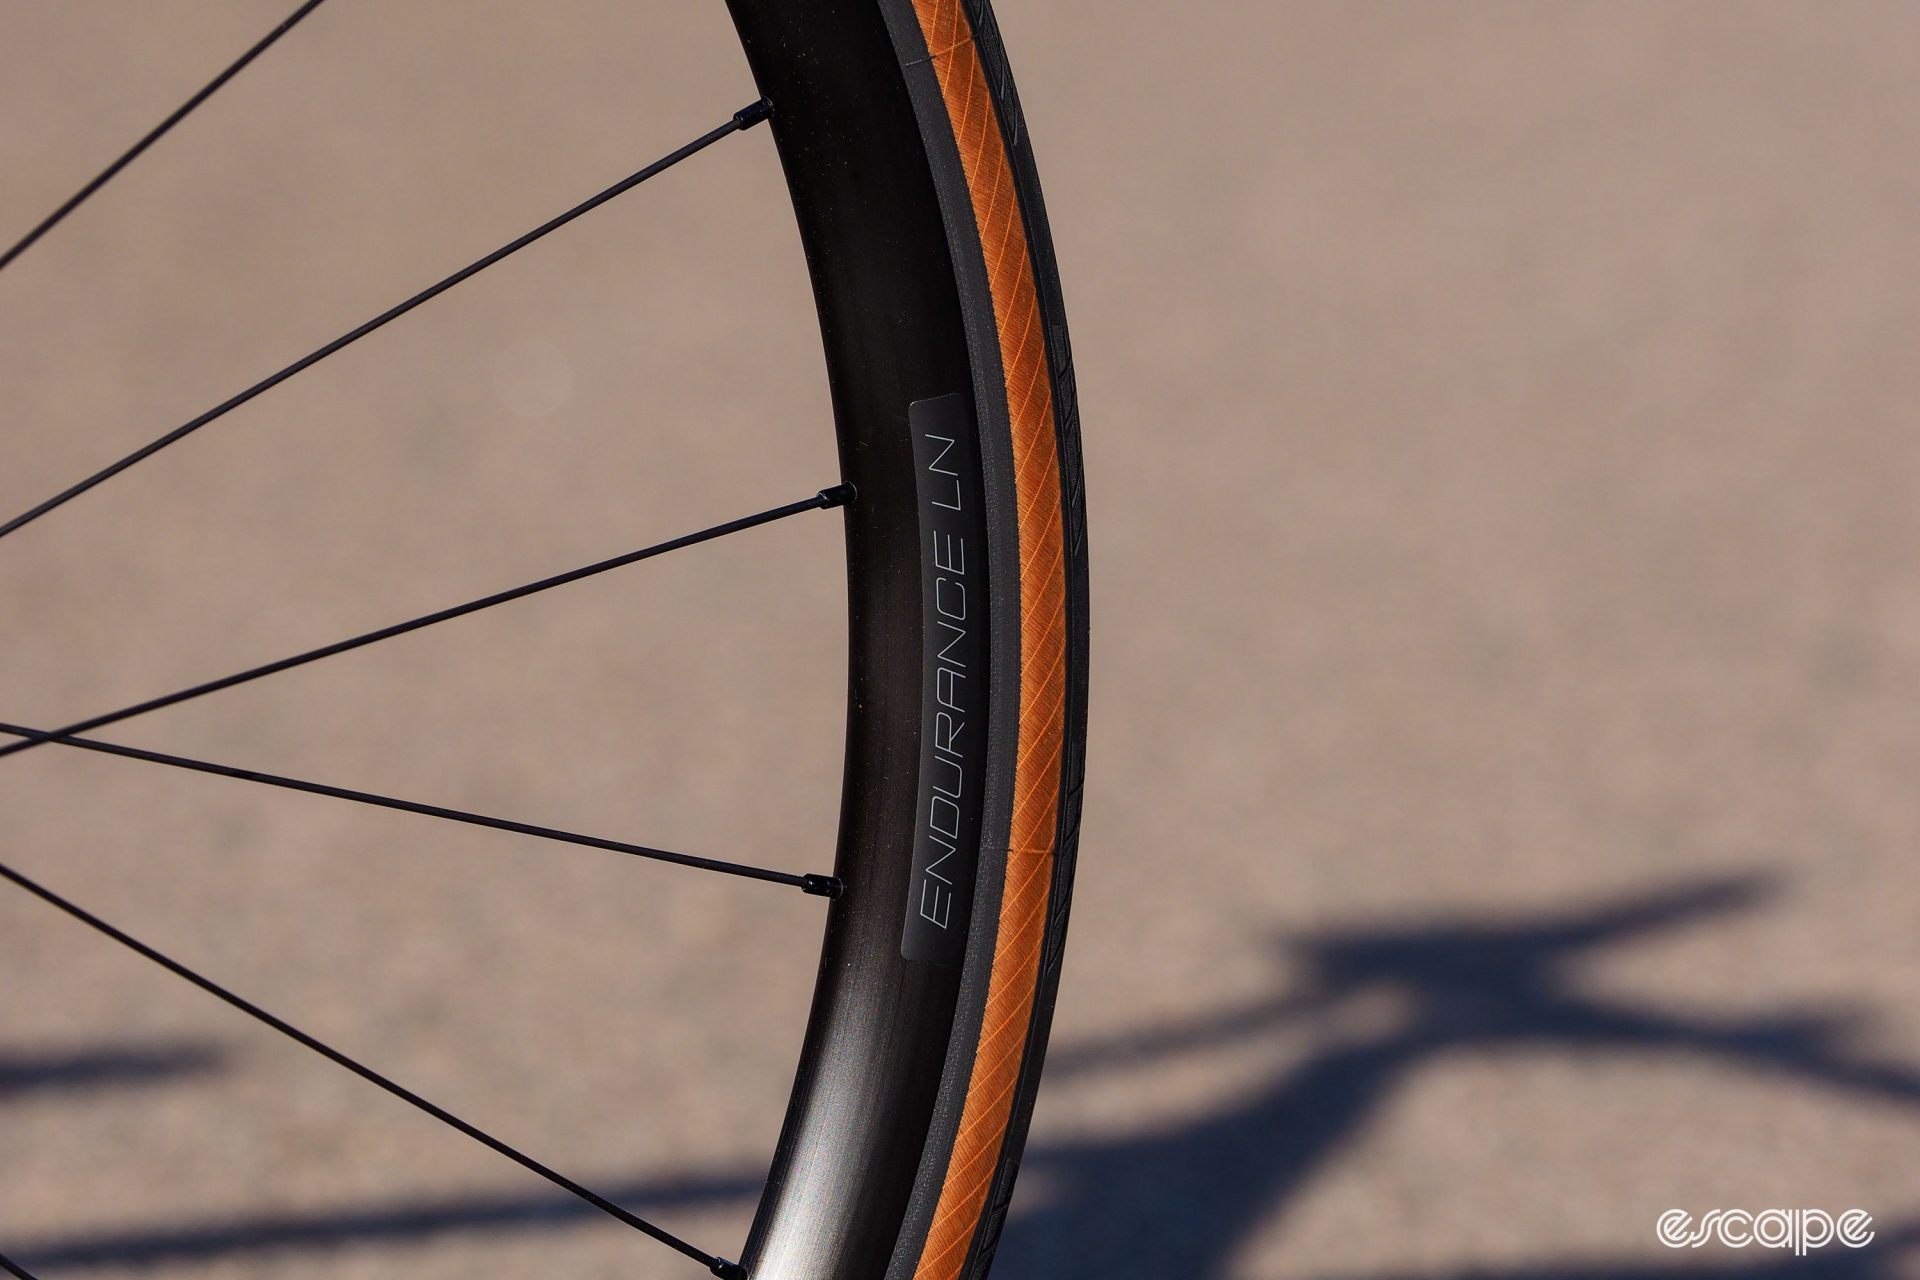 DT Swiss Endurance LN rims feature logos that are easily removable if you don't like them.